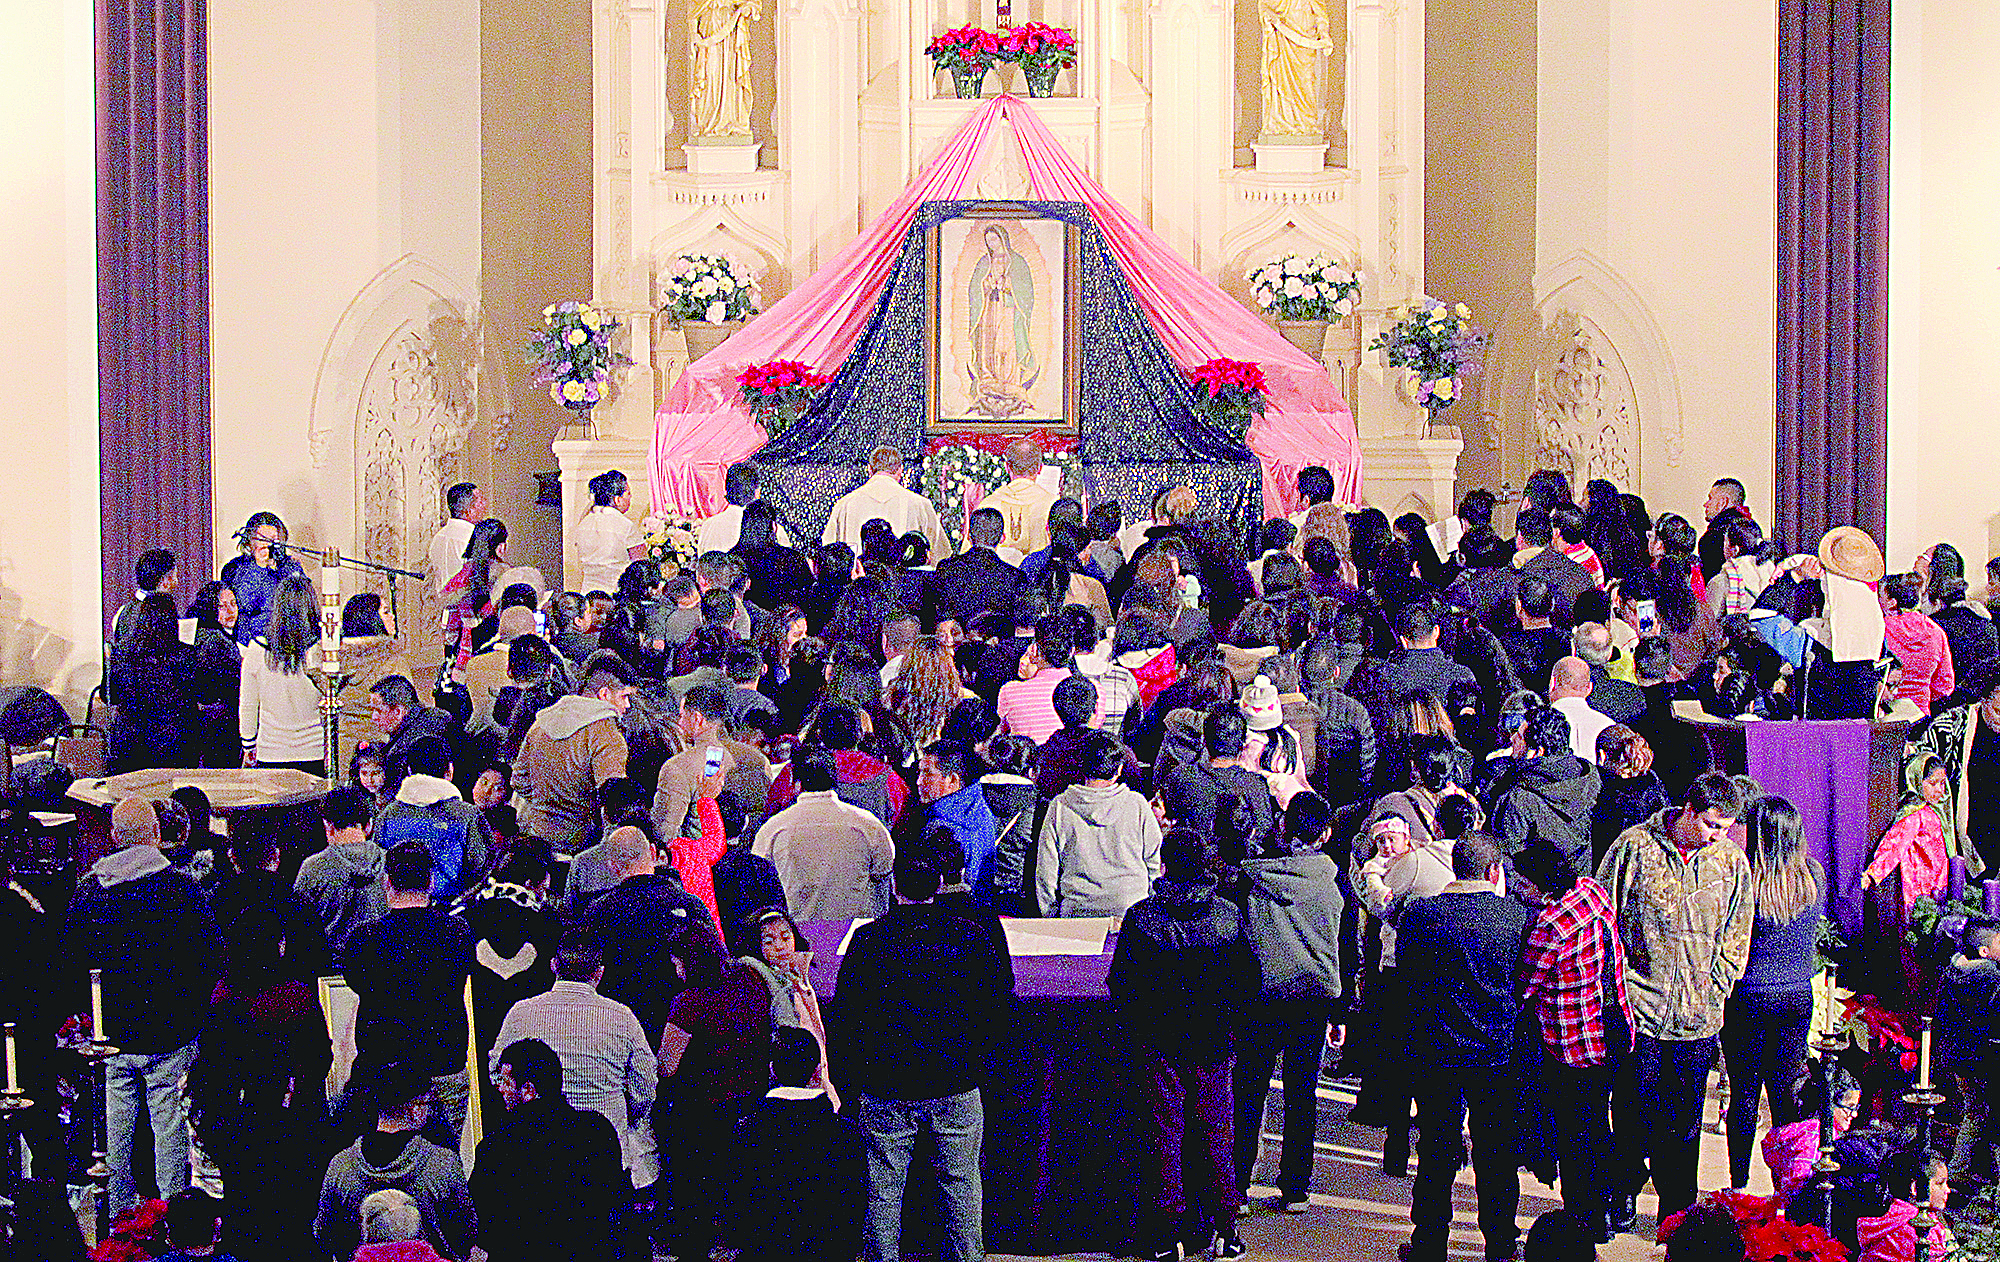 A picture says a thousand words: Our Lady of Guadalupe Celebration - The Catholic Telegraph (press release)